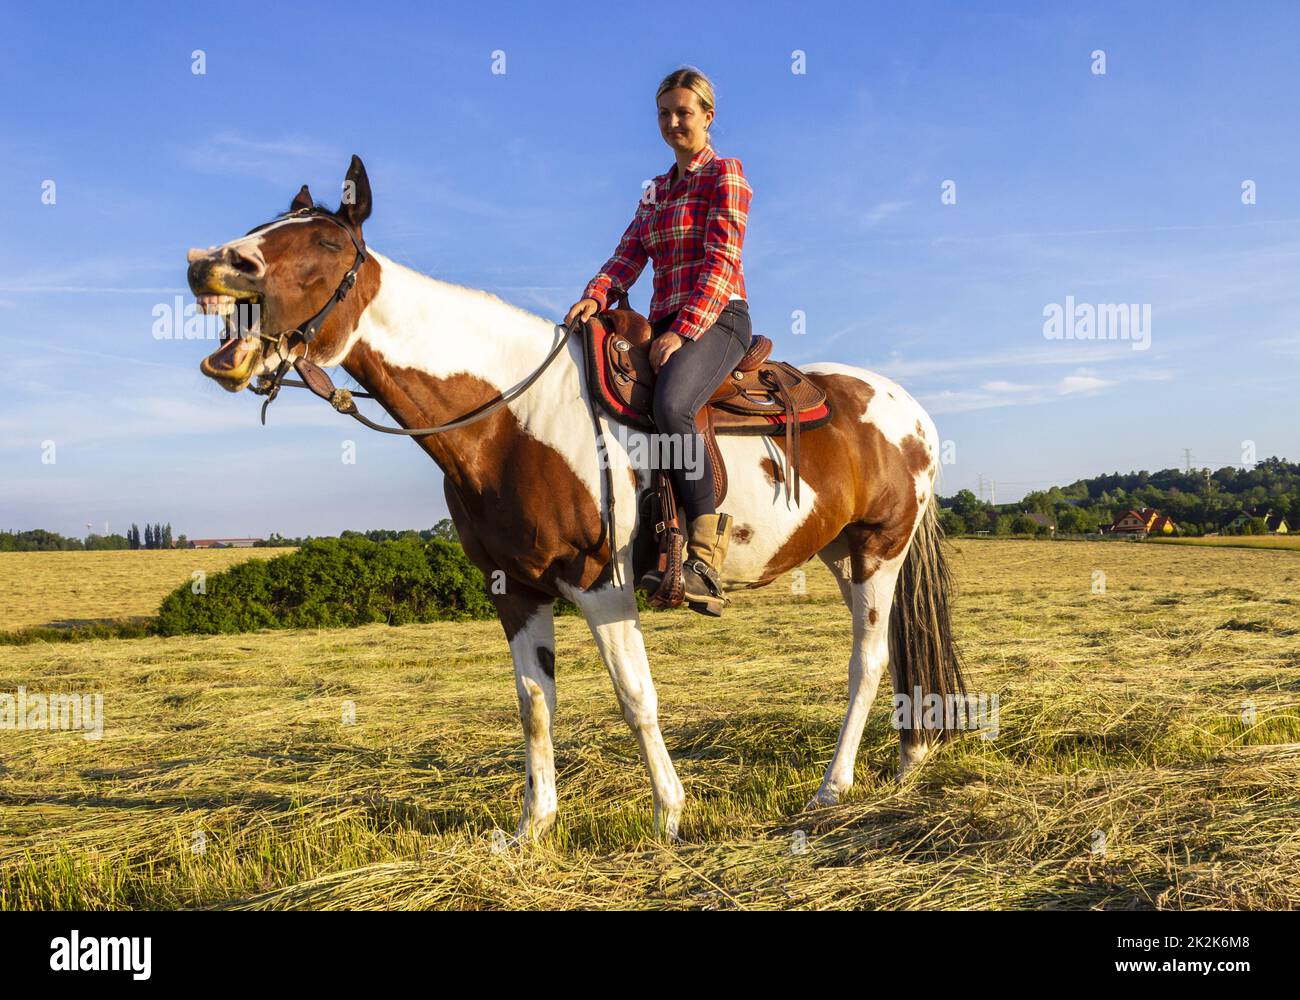 Laughing horse Stock Photo